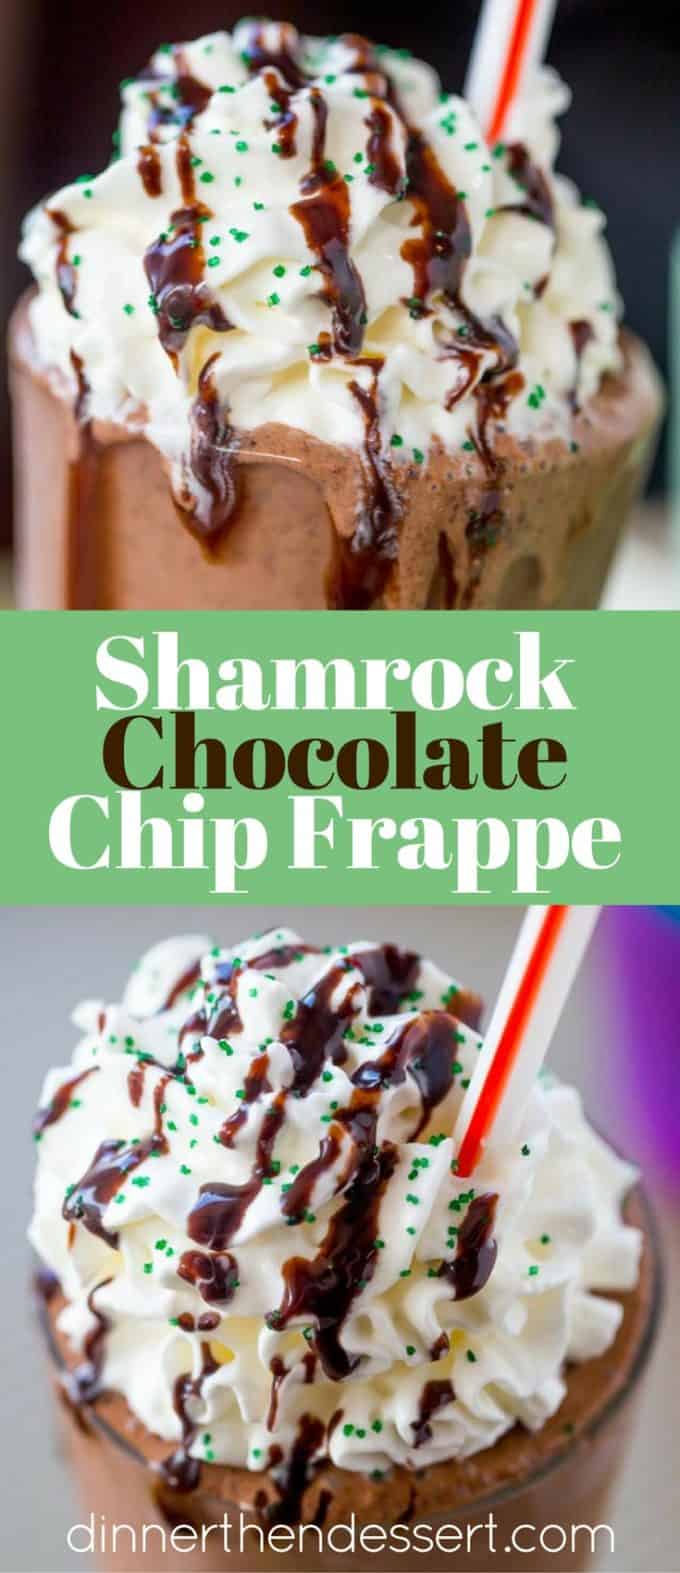 McDonald's Shamrock Chocolate Chip Frappe has a mocha caramel base with mint and chocolate chips blended in for a mint mocha frozen treat you'll love topped with chocolate sauce and whipped cream.